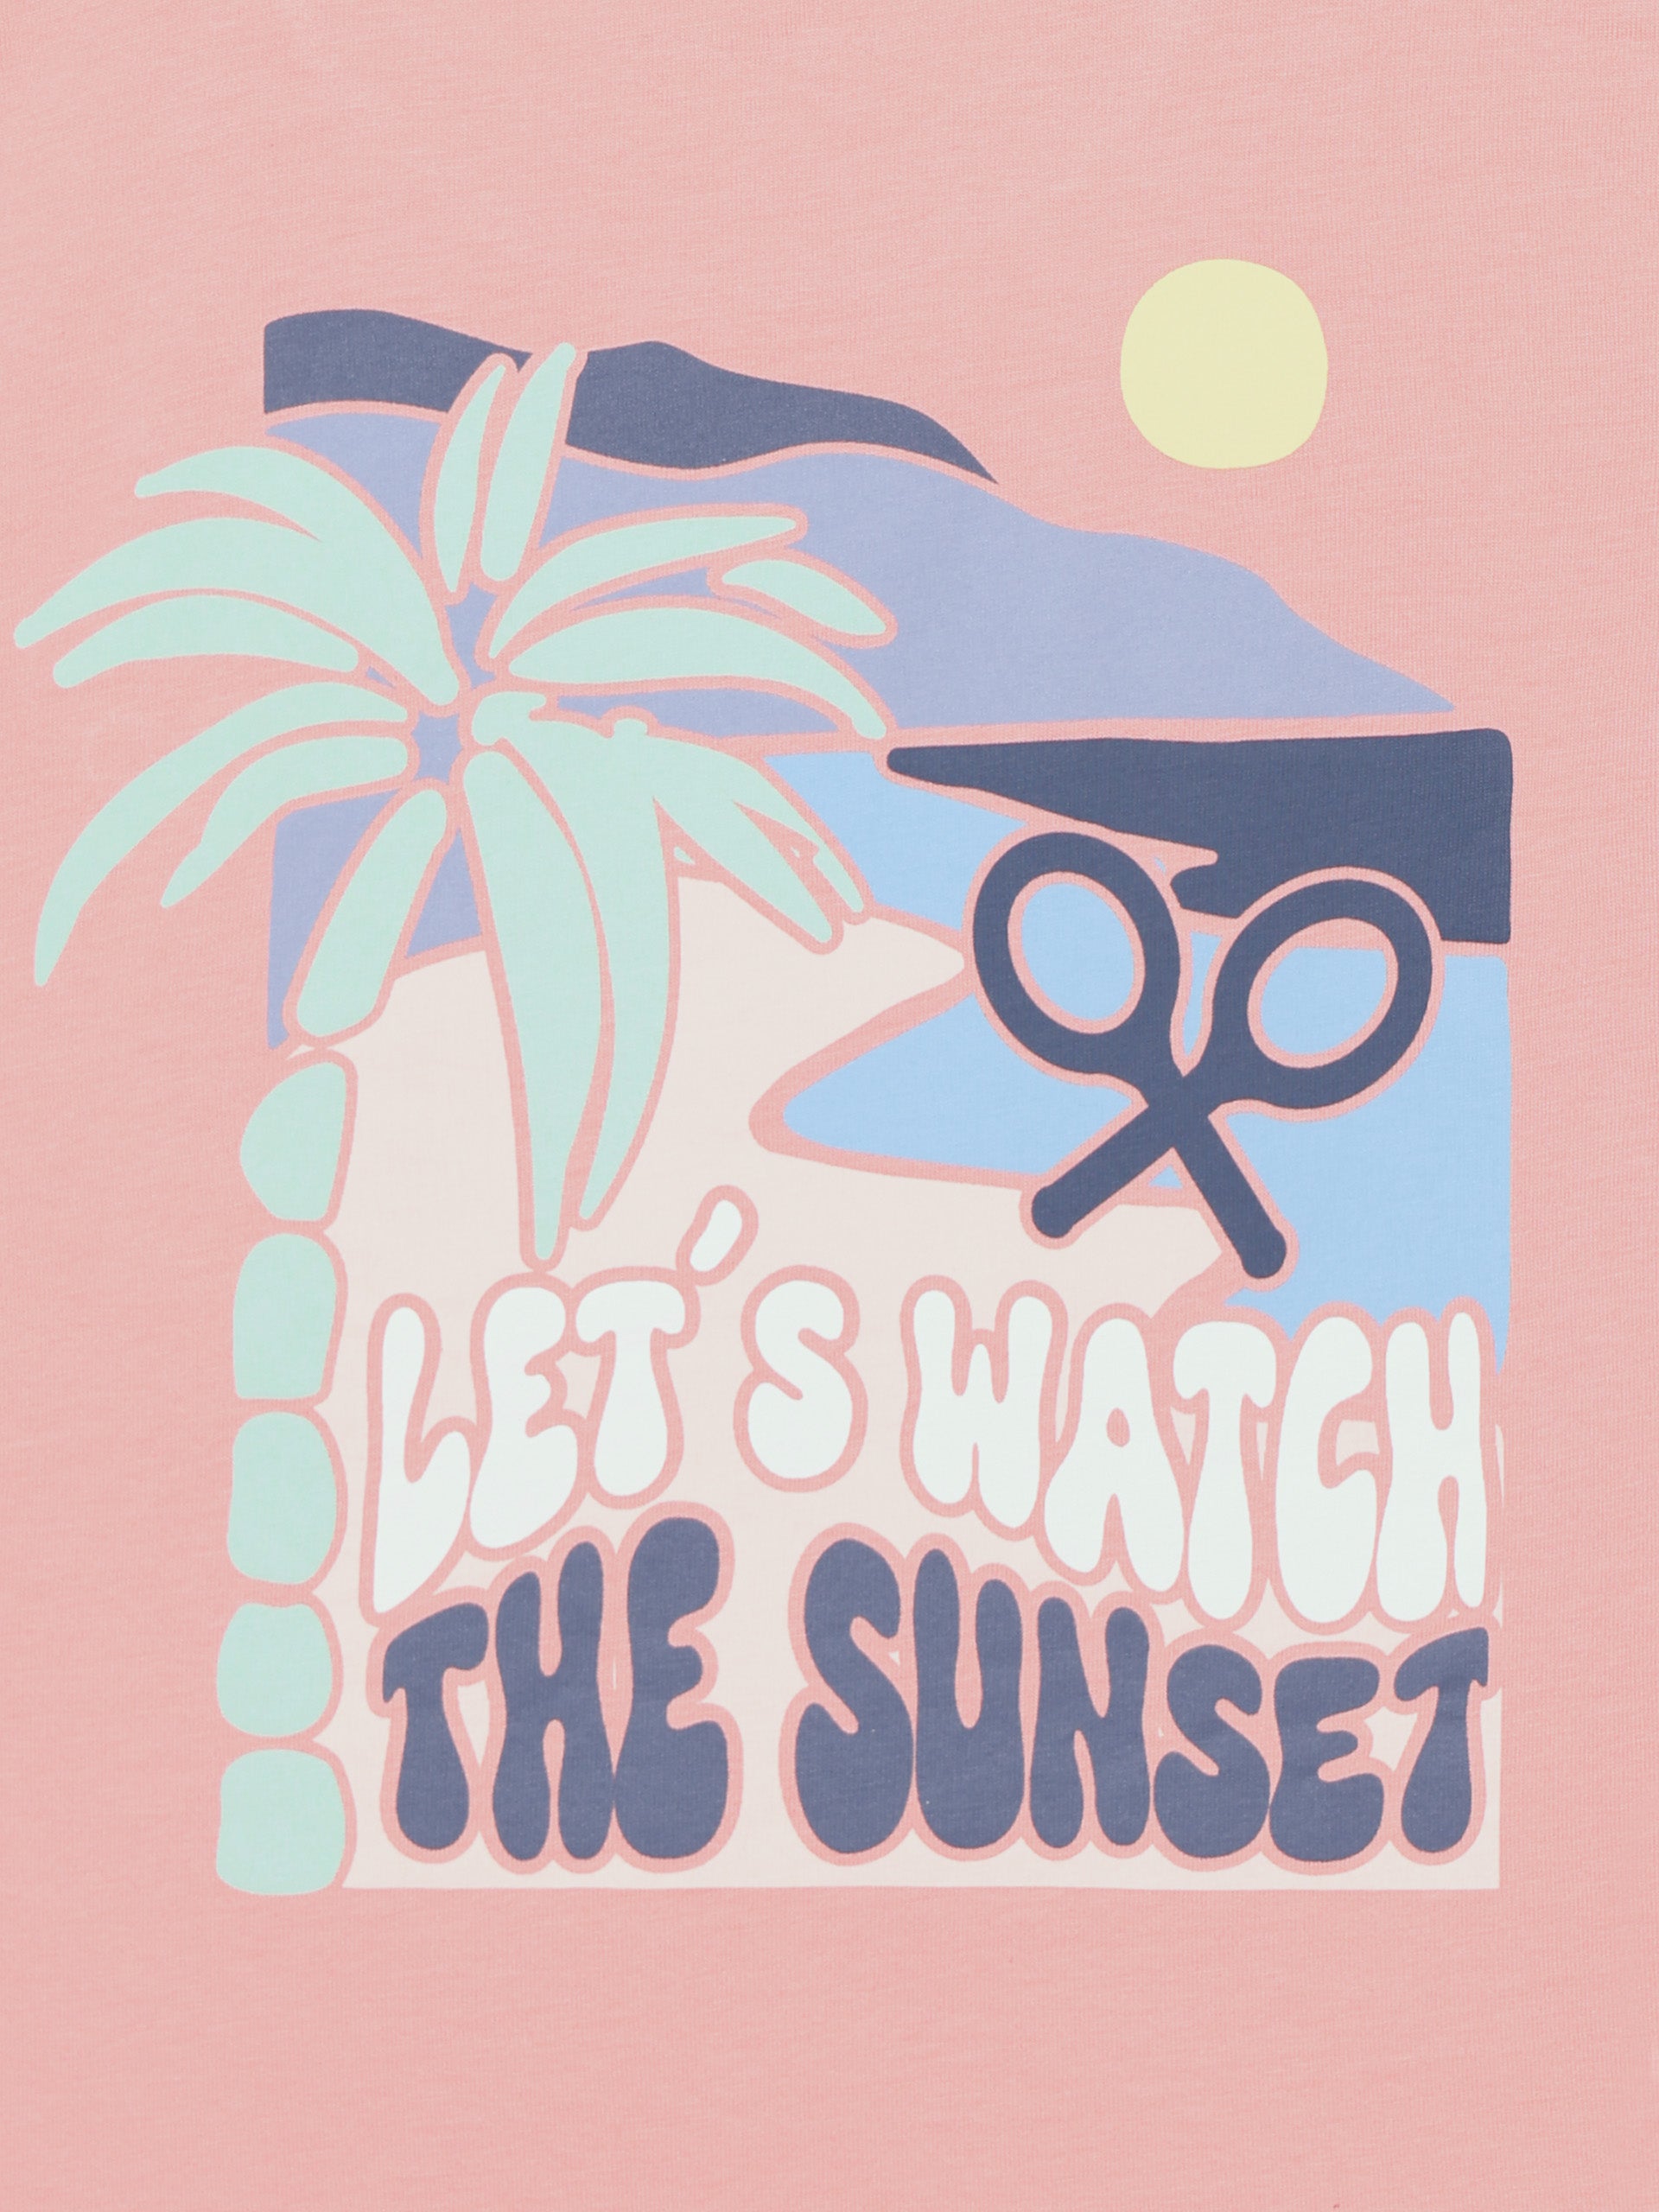 Camiseta kids let,s watch the sunset rosa